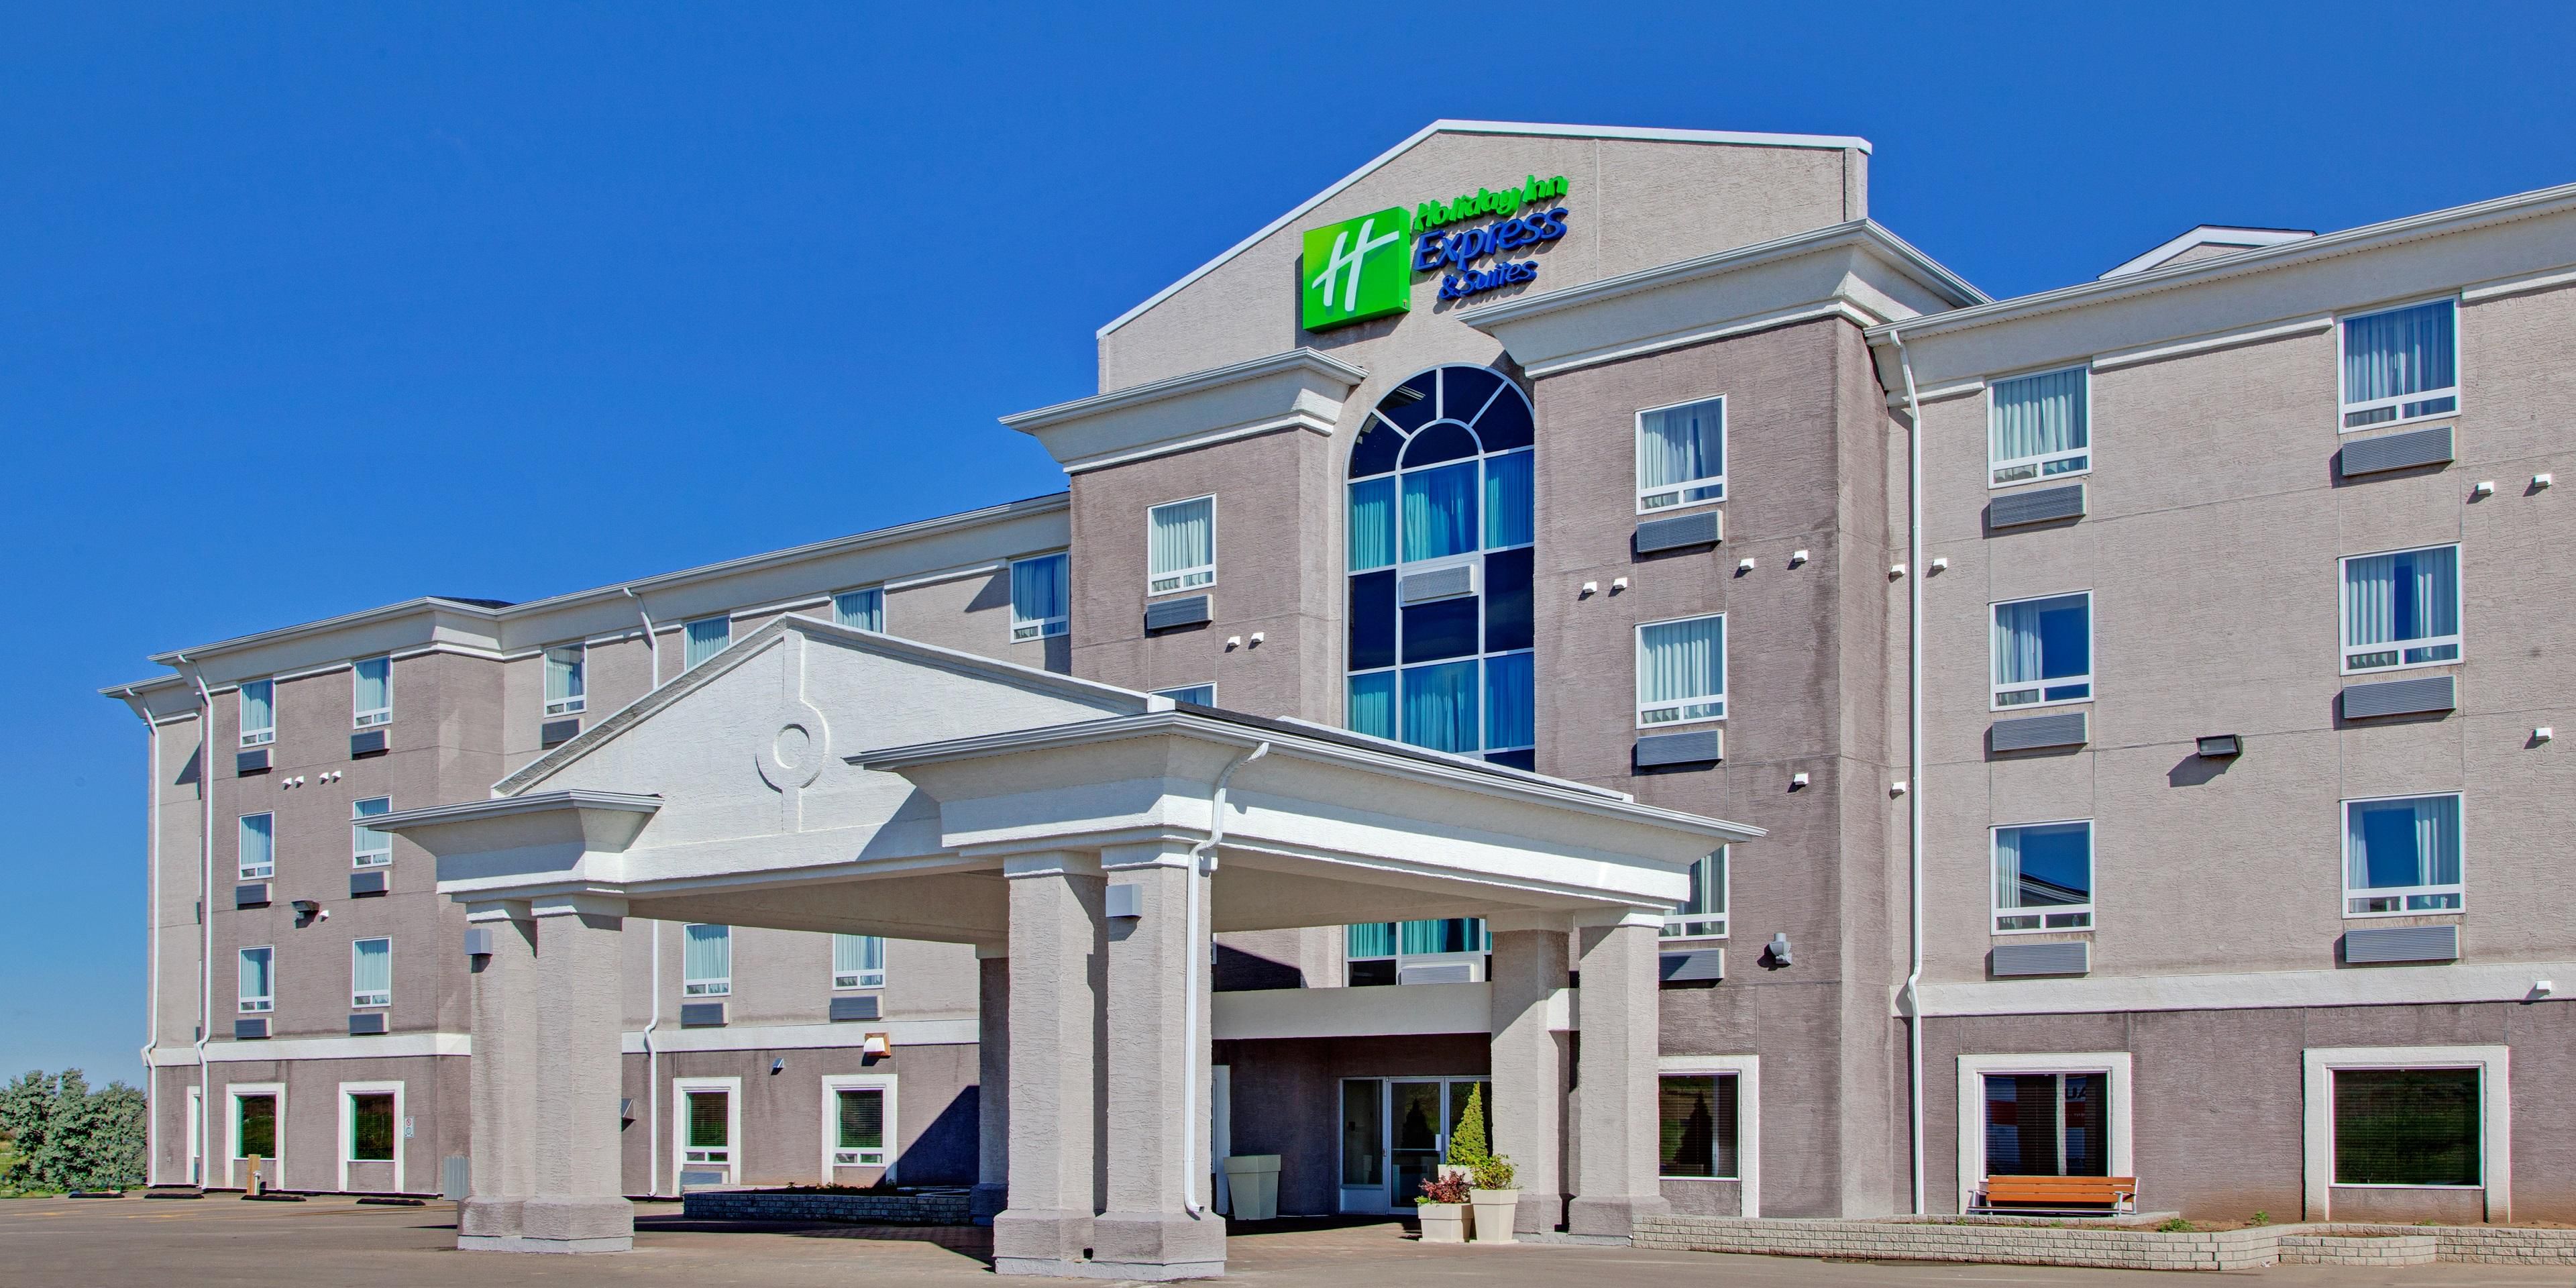 We are located just off of Highway 1 and close to Highway 4 and just 3 km from downtown Swift Current. You can find the most popular shopping and dining options and entertainment at the historic Lyric Theatre. The Credit Union iPlex is only 3 km away, making us a great option for next Sporting Event.